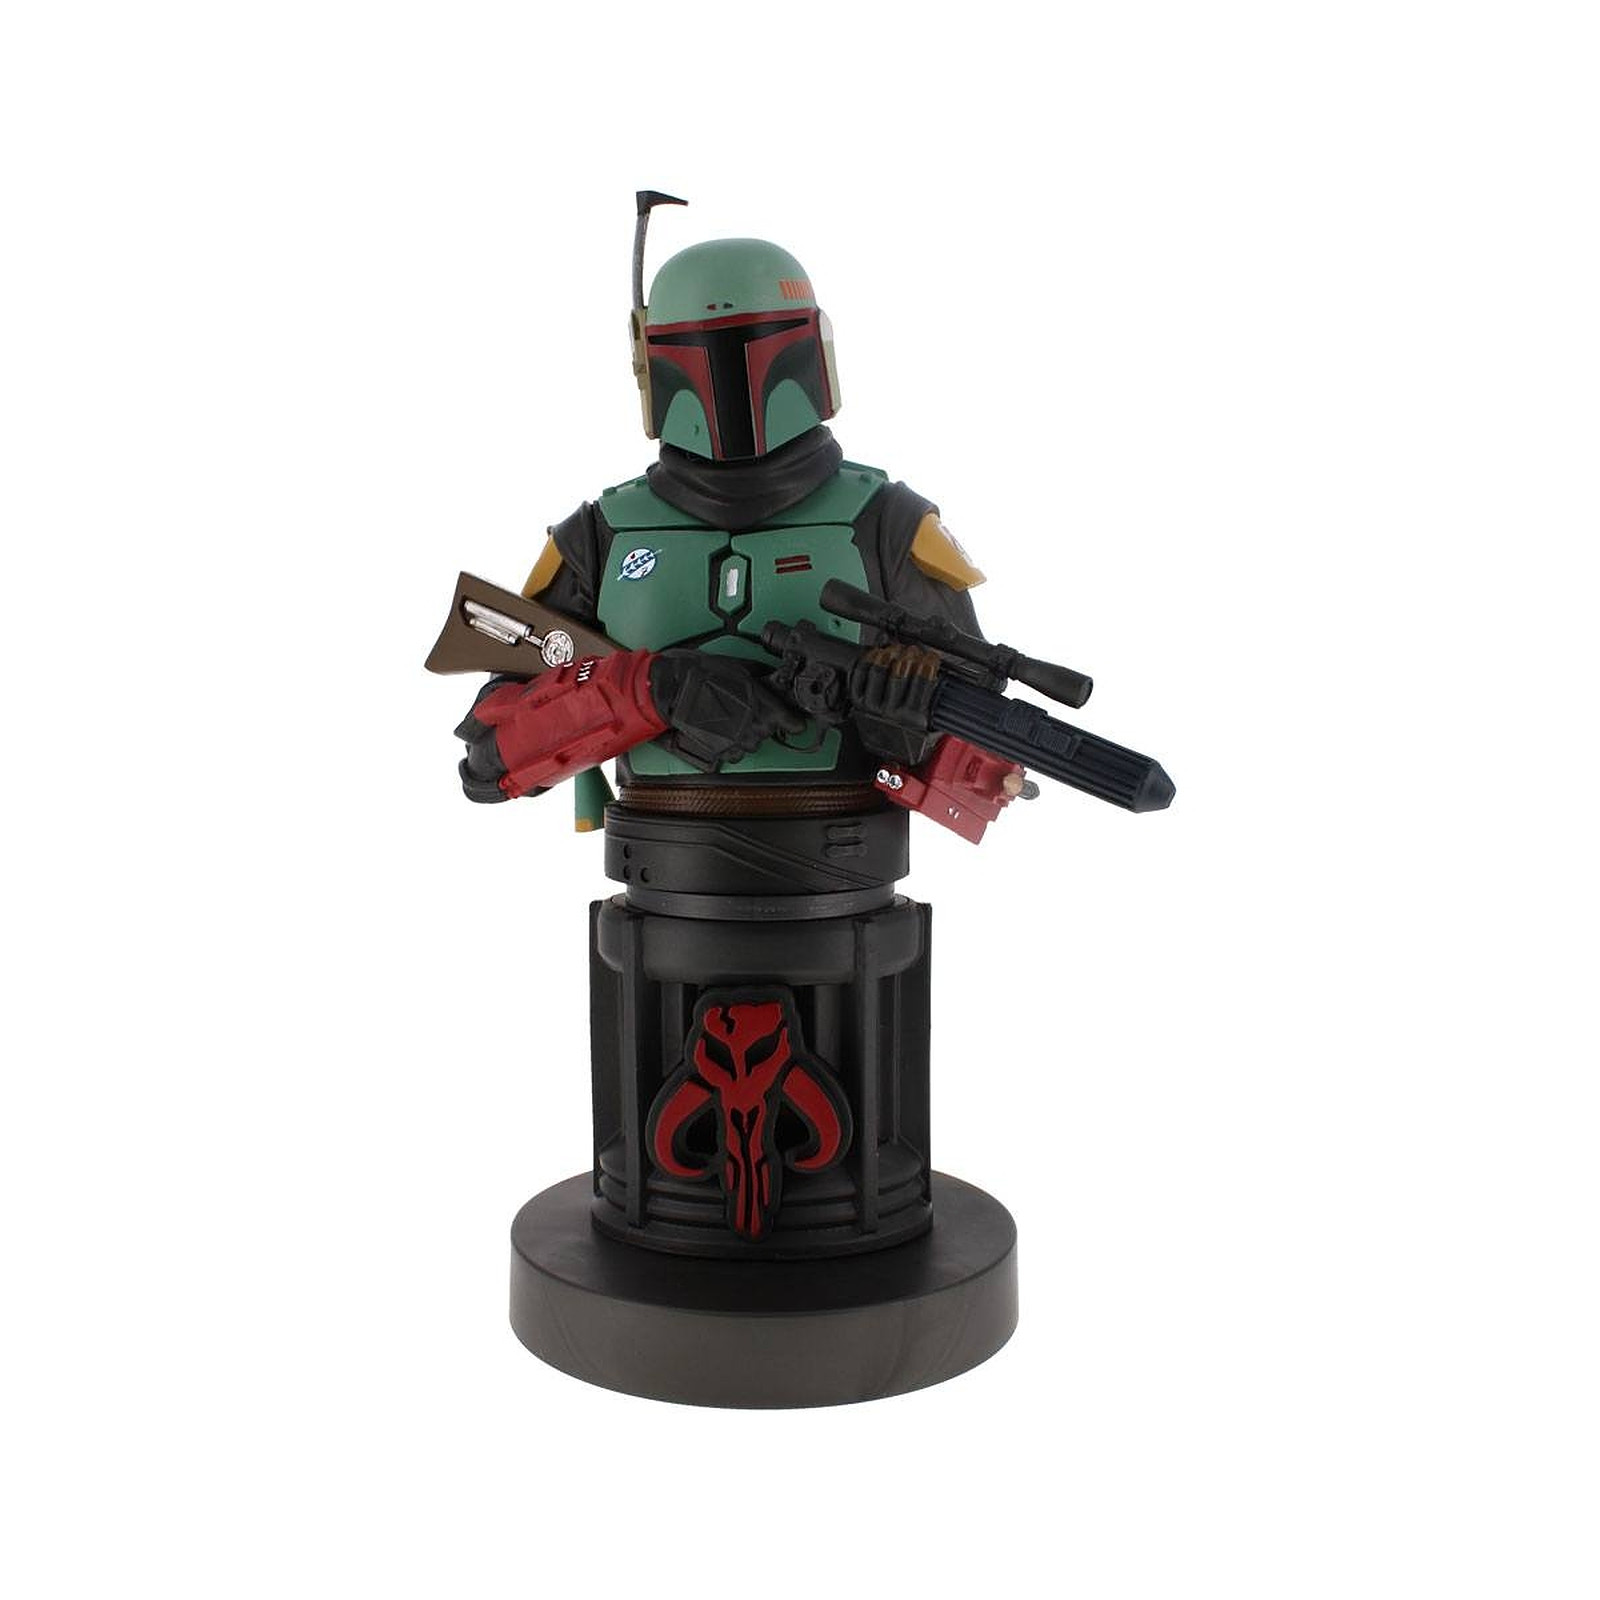 Star Wars - Figurine Cable Guy Boba Fett 2021 20 cm - Figurines Exquisite Gaming